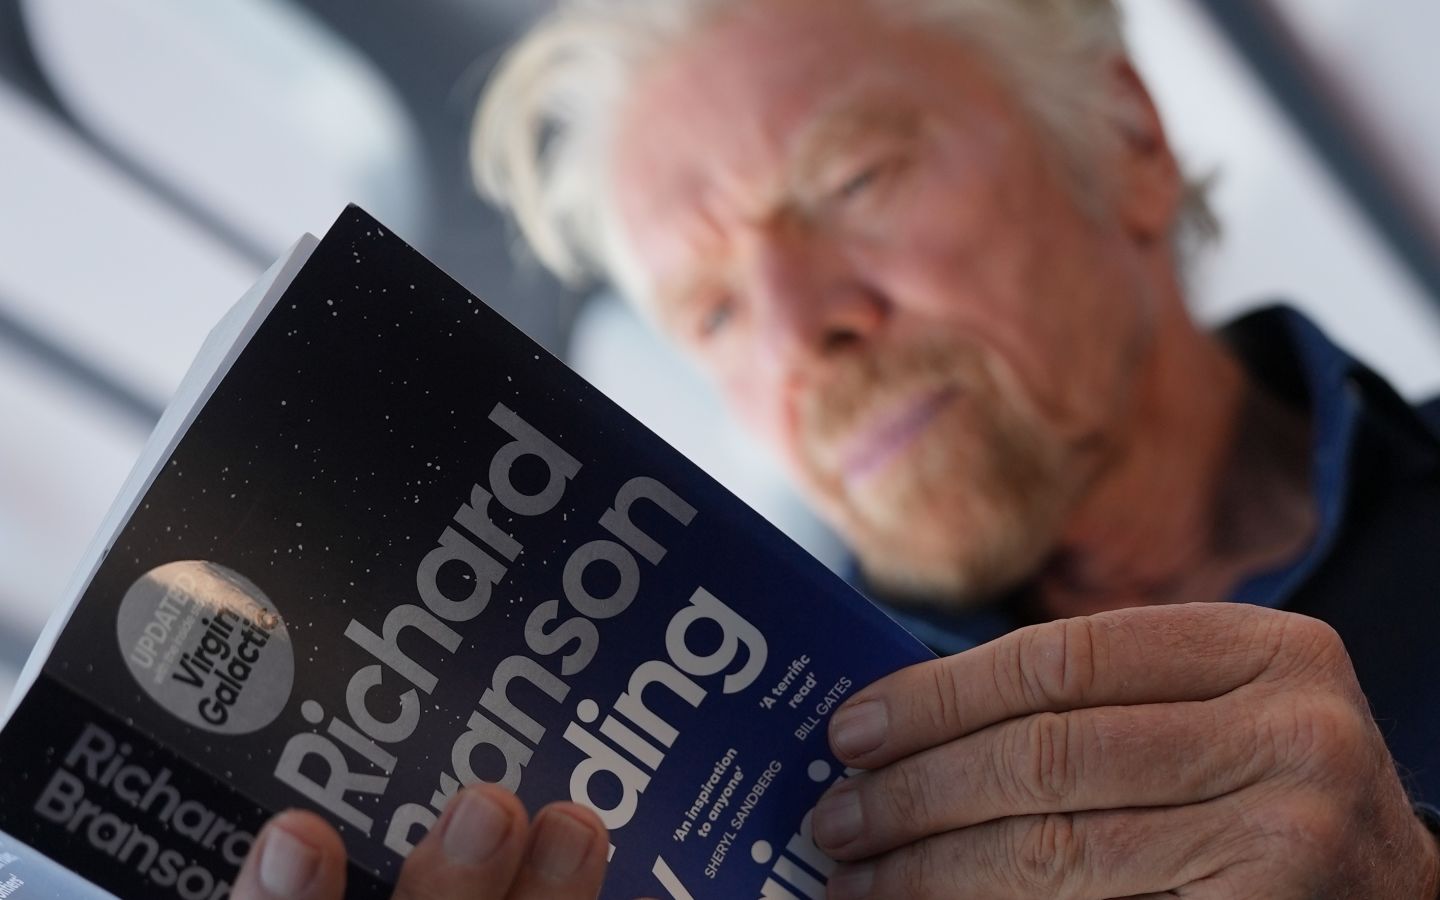 Richard Branson reading the updated version of my autiobiography, Finding My Virginity